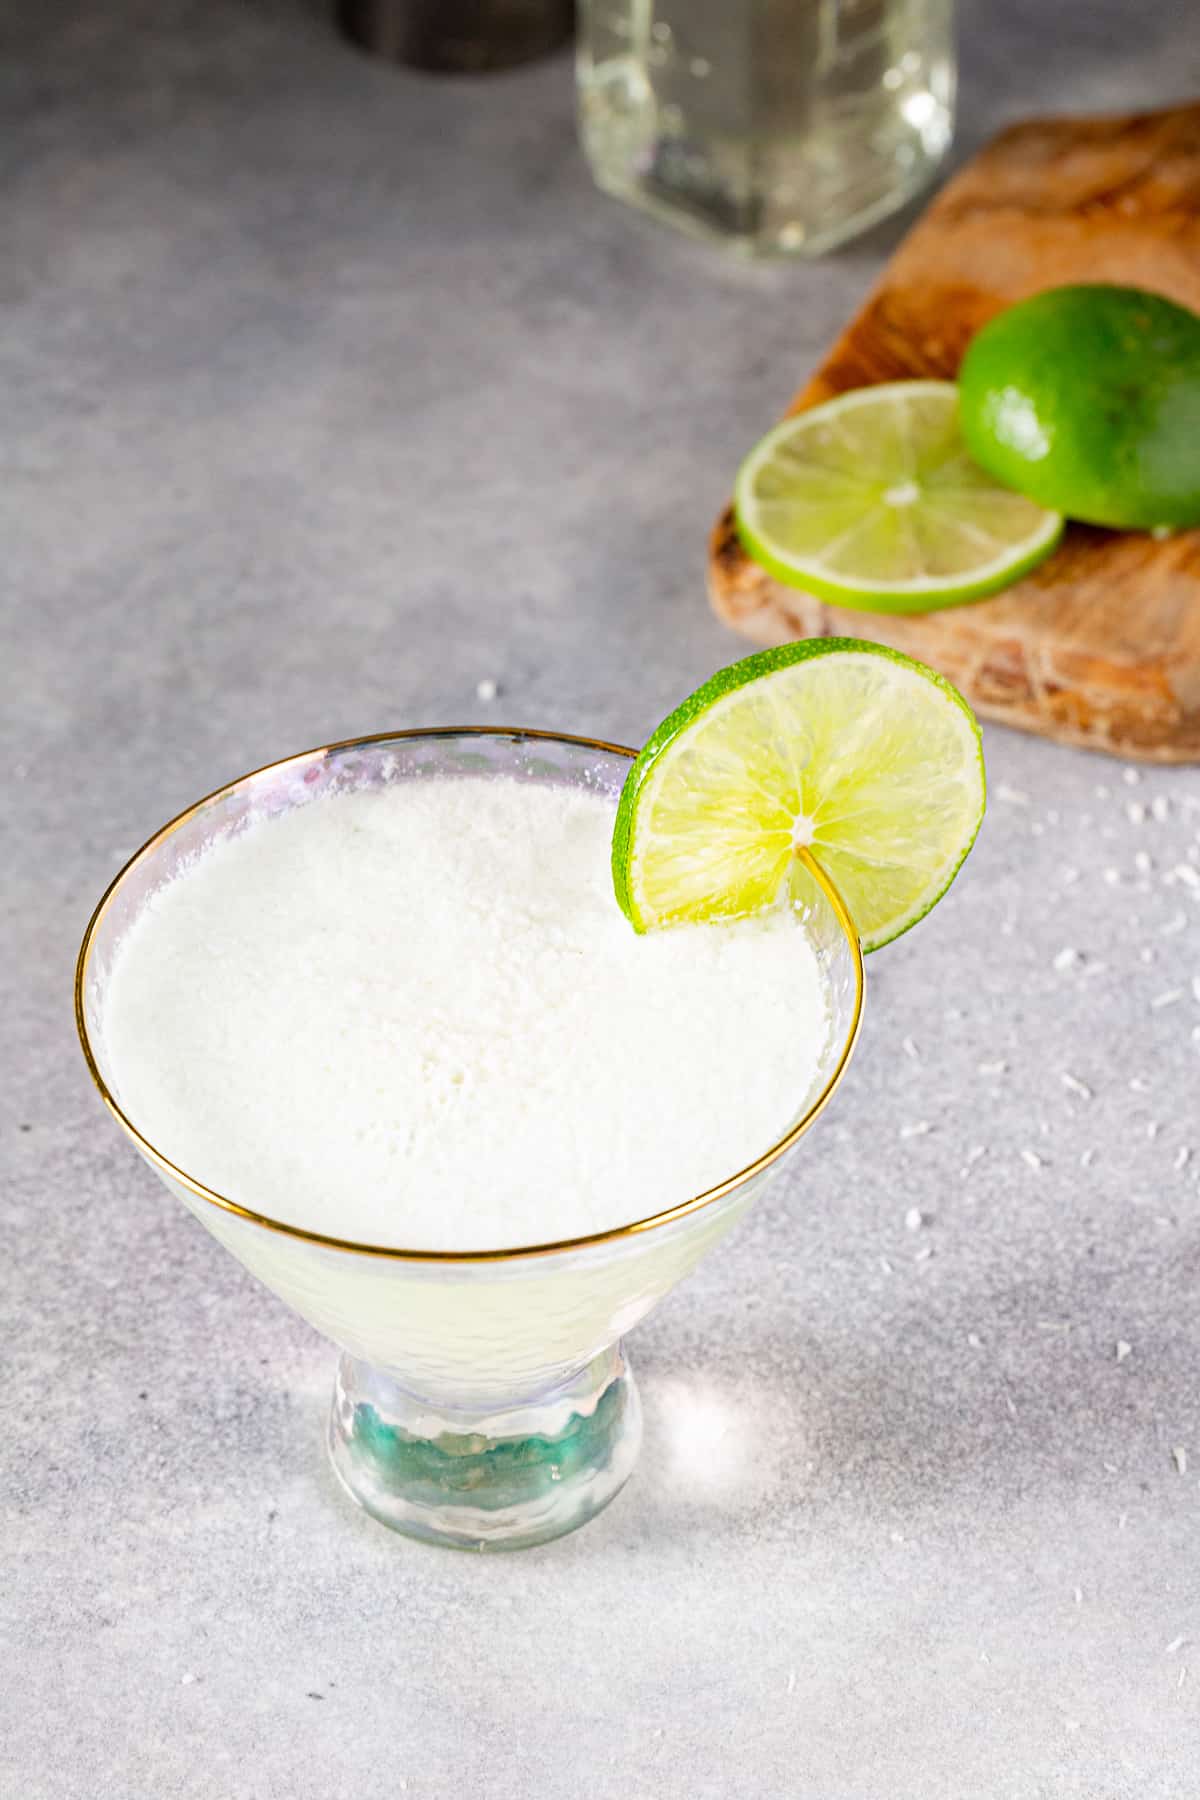 Overhead view of a lime mocktail with coconut milk. The non-alcoholic drink is in a martini glass and has a lime slice as garnish. A cut lime is seen in the background.